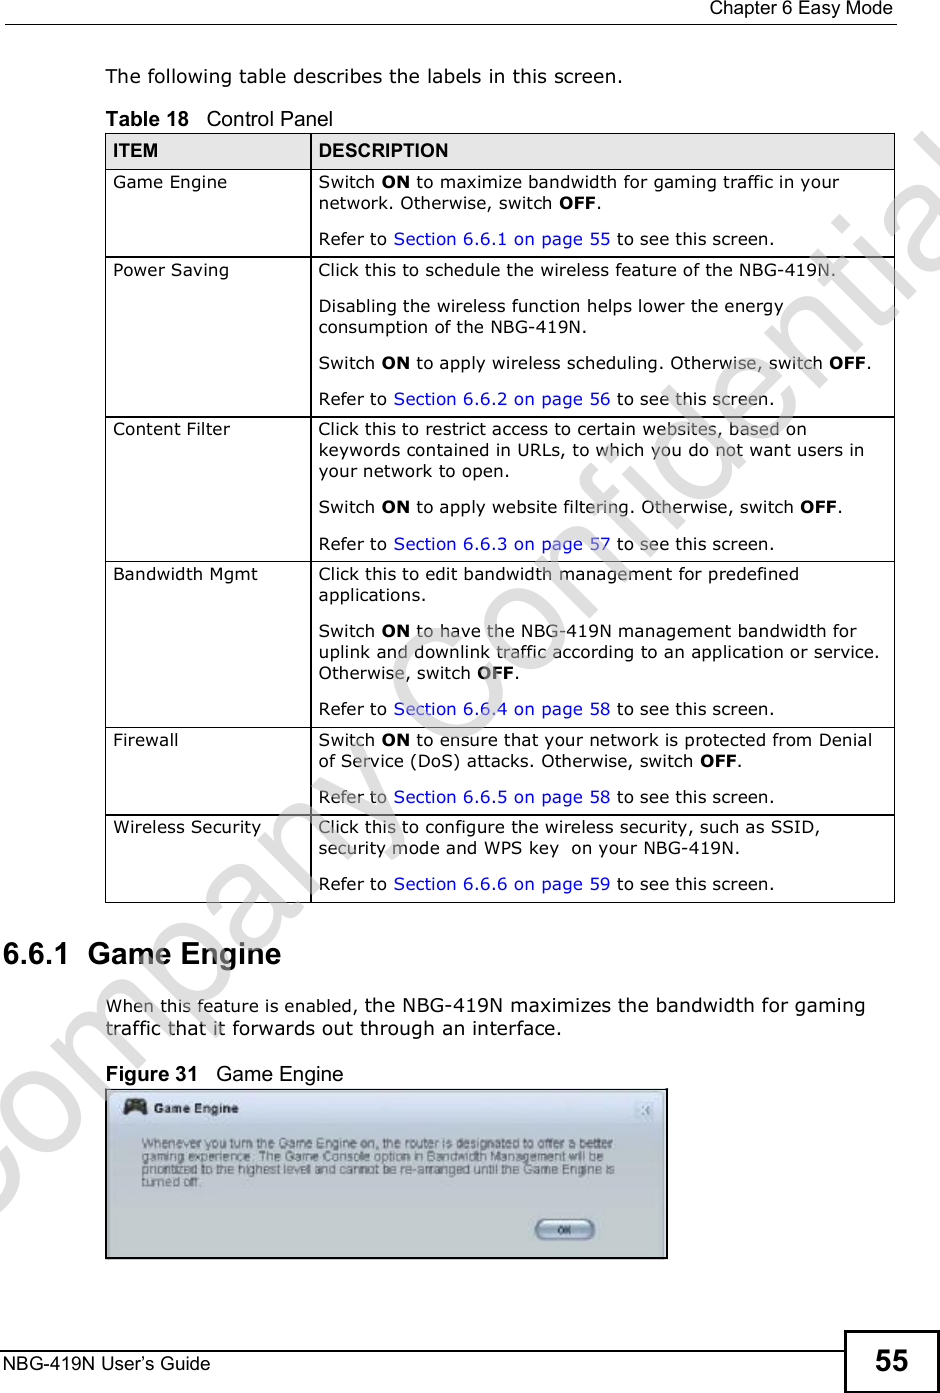  Chapter 6Easy ModeNBG-419N User s Guide 55The following table describes the labels in this screen. 6.6.1  Game EngineWhen this feature is enabled, the NBG-419N maximizes the bandwidth for gaming traffic that it forwards out through an interface.Figure 31   Game EngineTable 18   Control PanelITEM DESCRIPTIONGame EngineSwitch ON to maximize bandwidth for gaming traffic in your network. Otherwise, switch OFF.Refer to Section 6.6.1 on page 55 to see this screen.Power SavingClick this to schedule the wireless feature of the NBG-419N. Disabling the wireless function helps lower the energy consumption of the NBG-419N. Switch ON to apply wireless scheduling. Otherwise, switch OFF.Refer to Section 6.6.2 on page 56 to see this screen.Content FilterClick this to restrict access to certain websites, based on keywords contained in URLs, to which you do not want users in your network to open. Switch ON to apply website filtering. Otherwise, switch OFF.Refer to Section 6.6.3 on page 57 to see this screen.Bandwidth MgmtClick this to edit bandwidth management for predefined applications. Switch ON to have the NBG-419N management bandwidth for uplink and downlink traffic according to an application or service. Otherwise, switch OFF.Refer to Section 6.6.4 on page 58 to see this screen.FirewallSwitch ON to ensure that your network is protected from Denial of Service (DoS) attacks. Otherwise, switch OFF.Refer to Section 6.6.5 on page 58 to see this screen.Wireless SecurityClick this to configure the wireless security, such as SSID, security mode and WPS key  on your NBG-419N.  Refer to Section 6.6.6 on page 59 to see this screen.Company Confidential